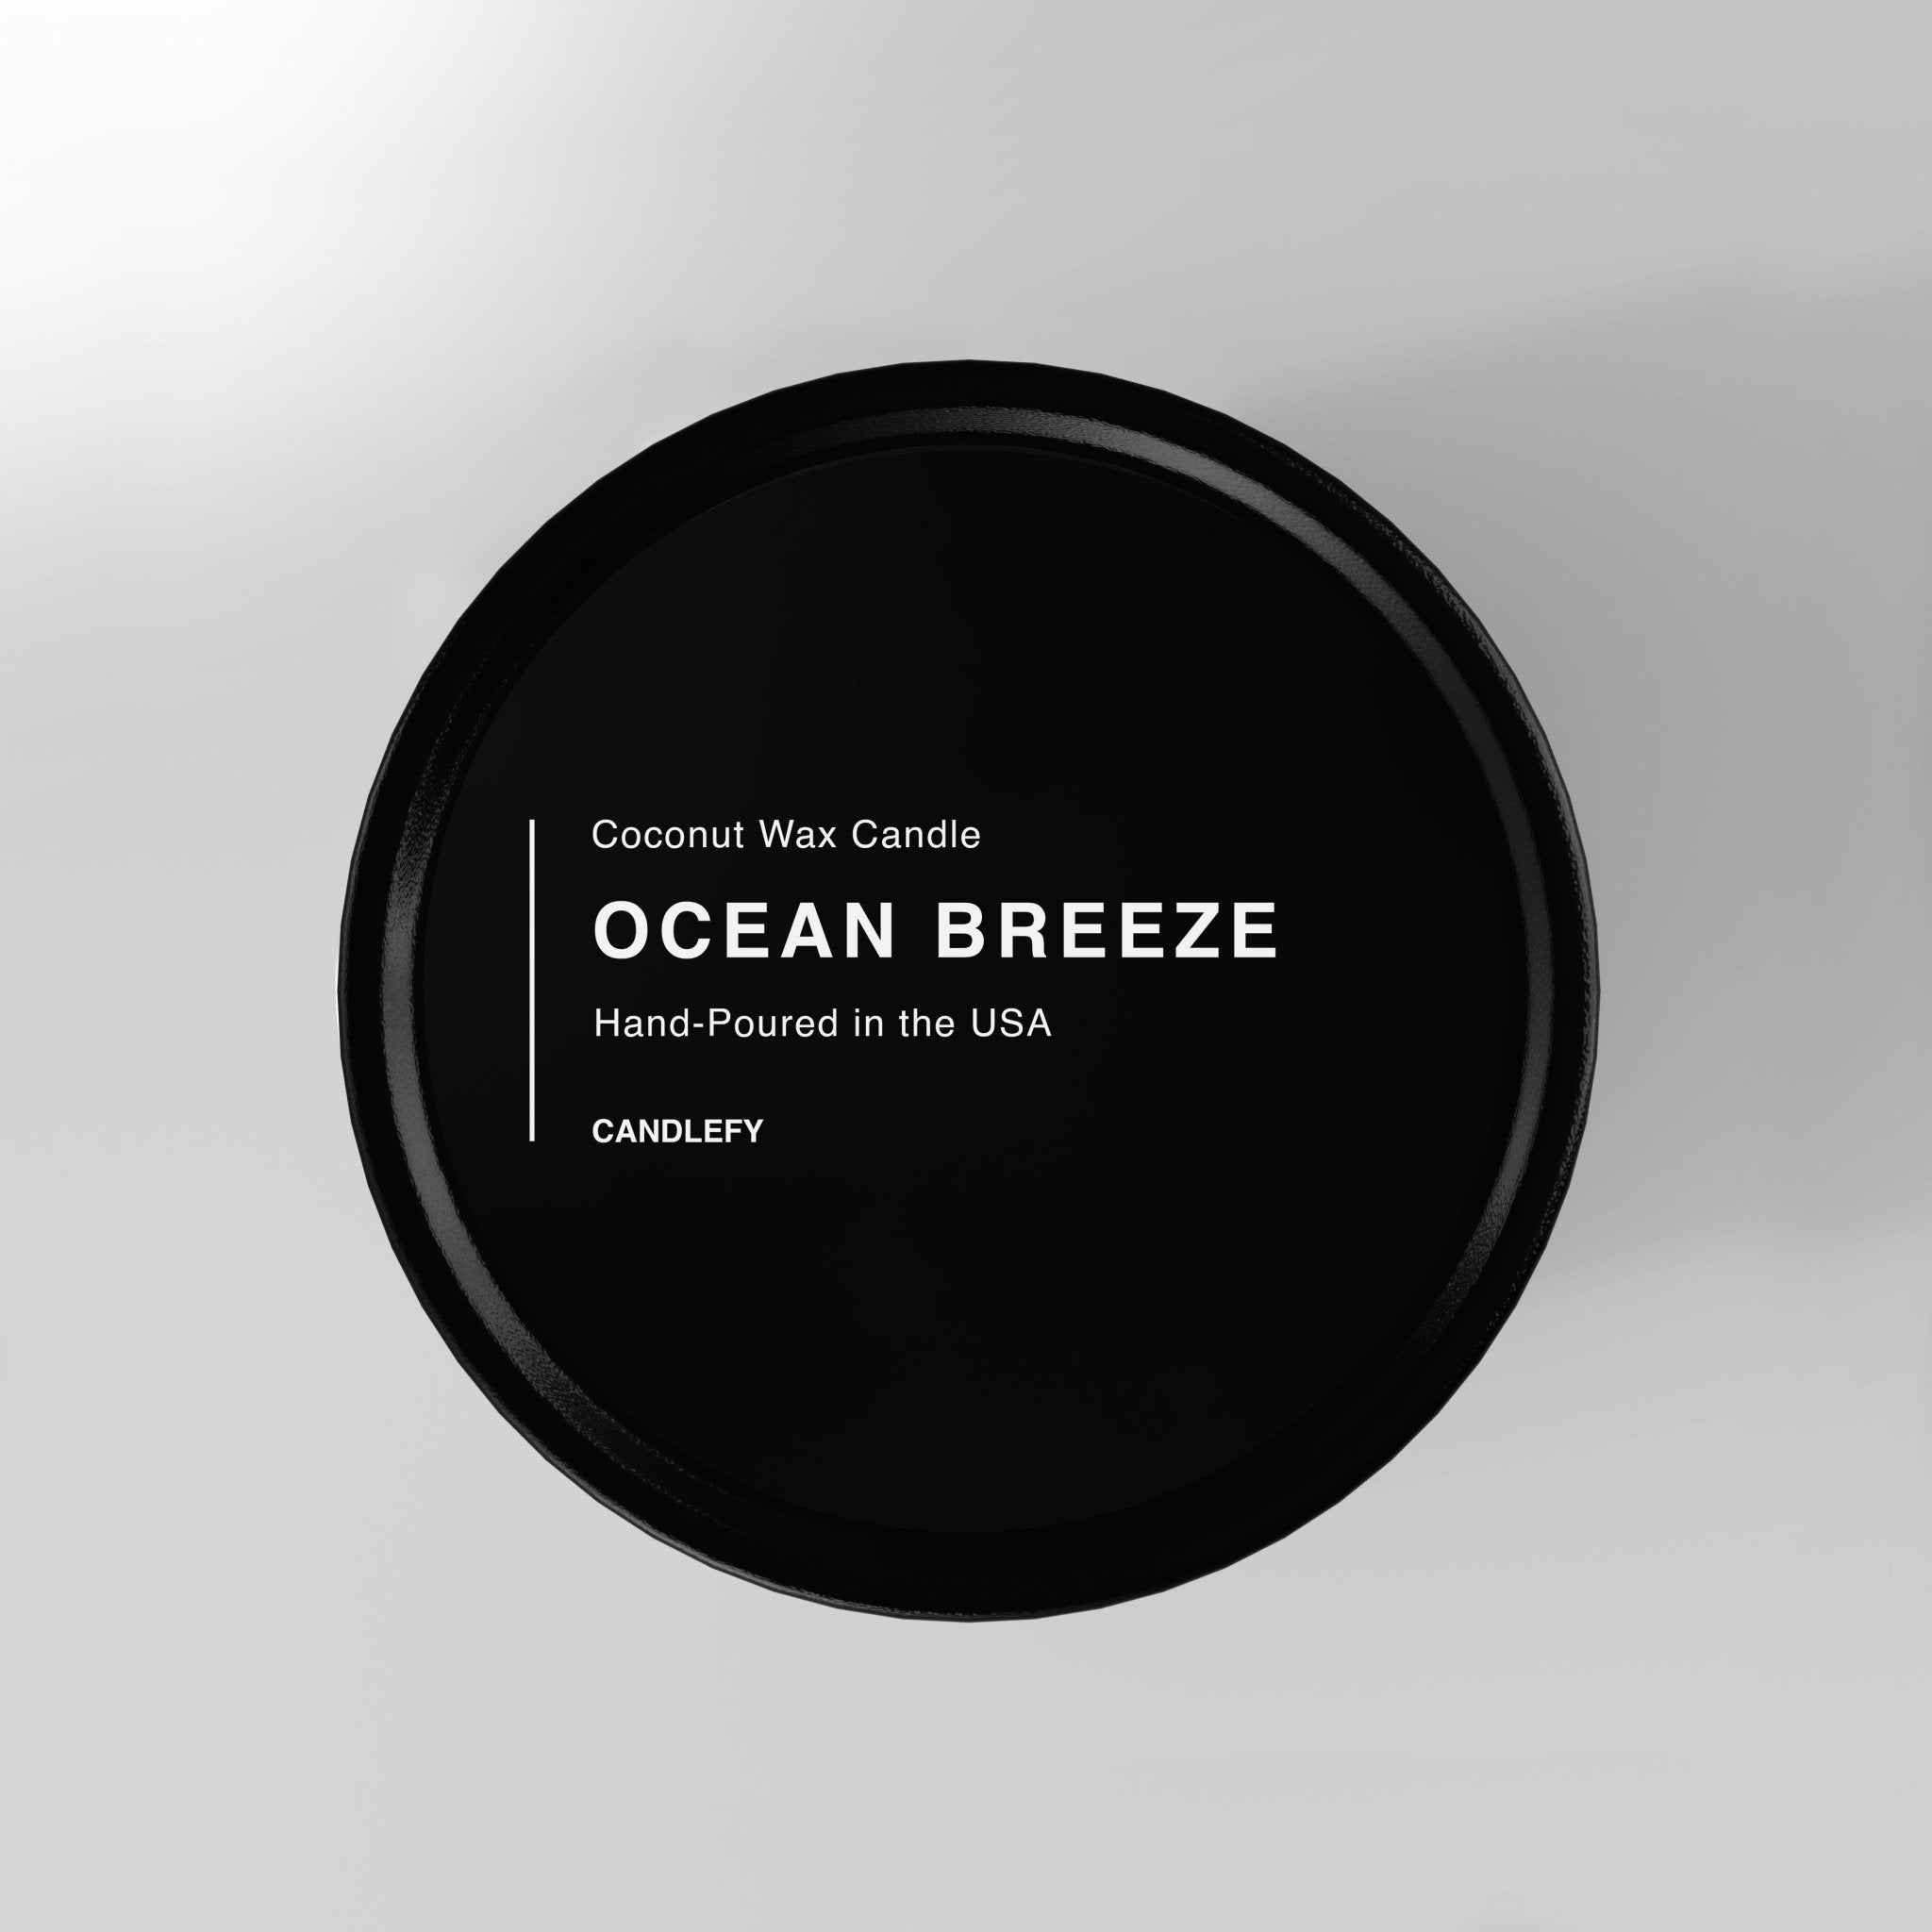 Ocean Breeze Natural Wax Scented Candle in Black Travel Tin - Candlefy